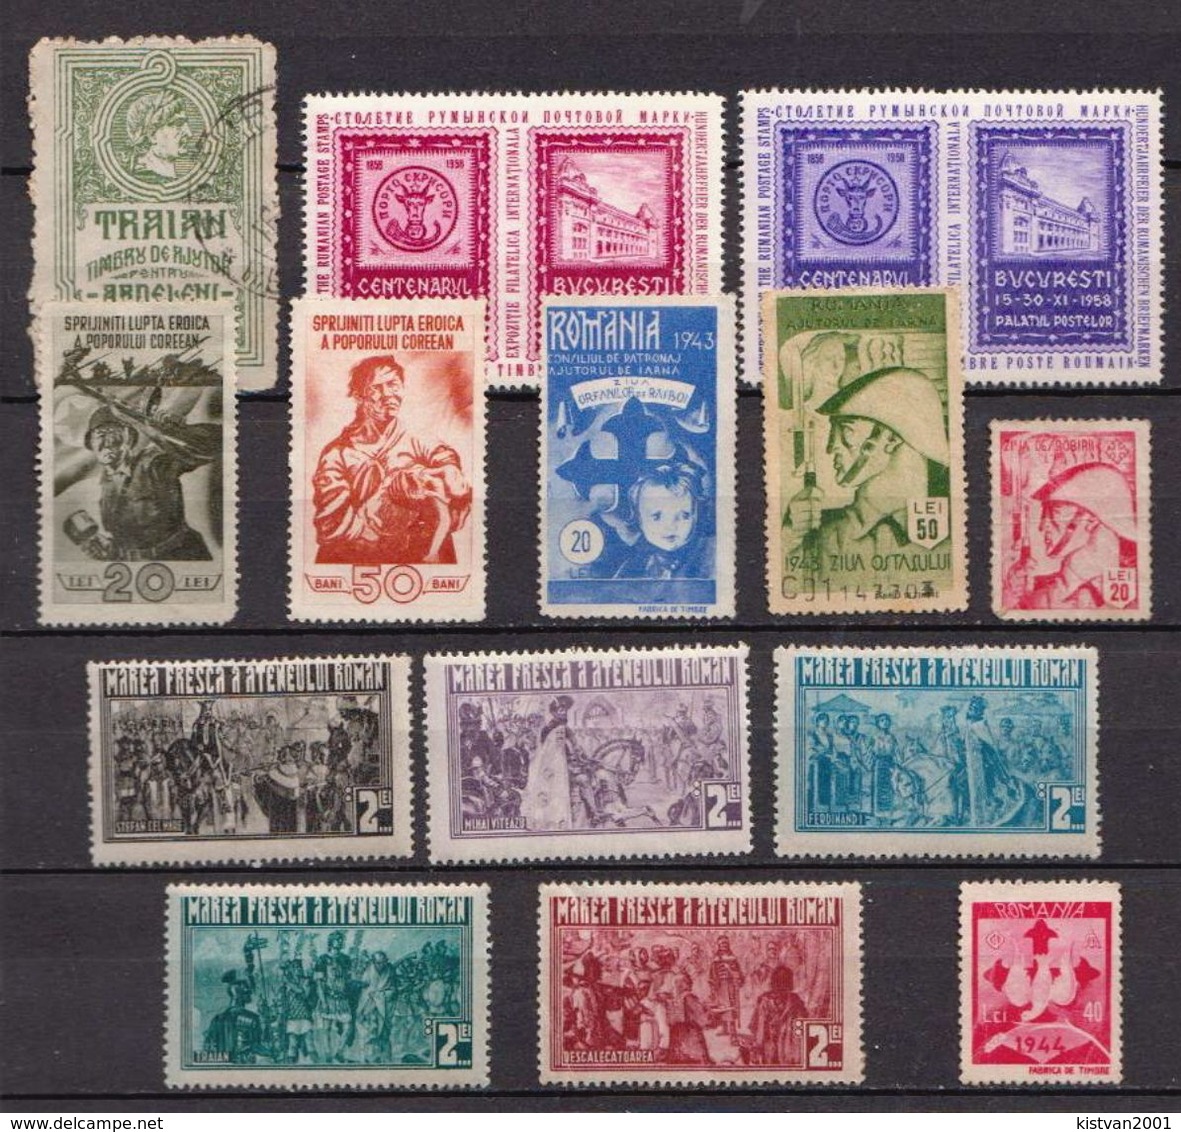 Romania BOB Used Stamps, Interesting Sort, 150 Stamps - Postage Due